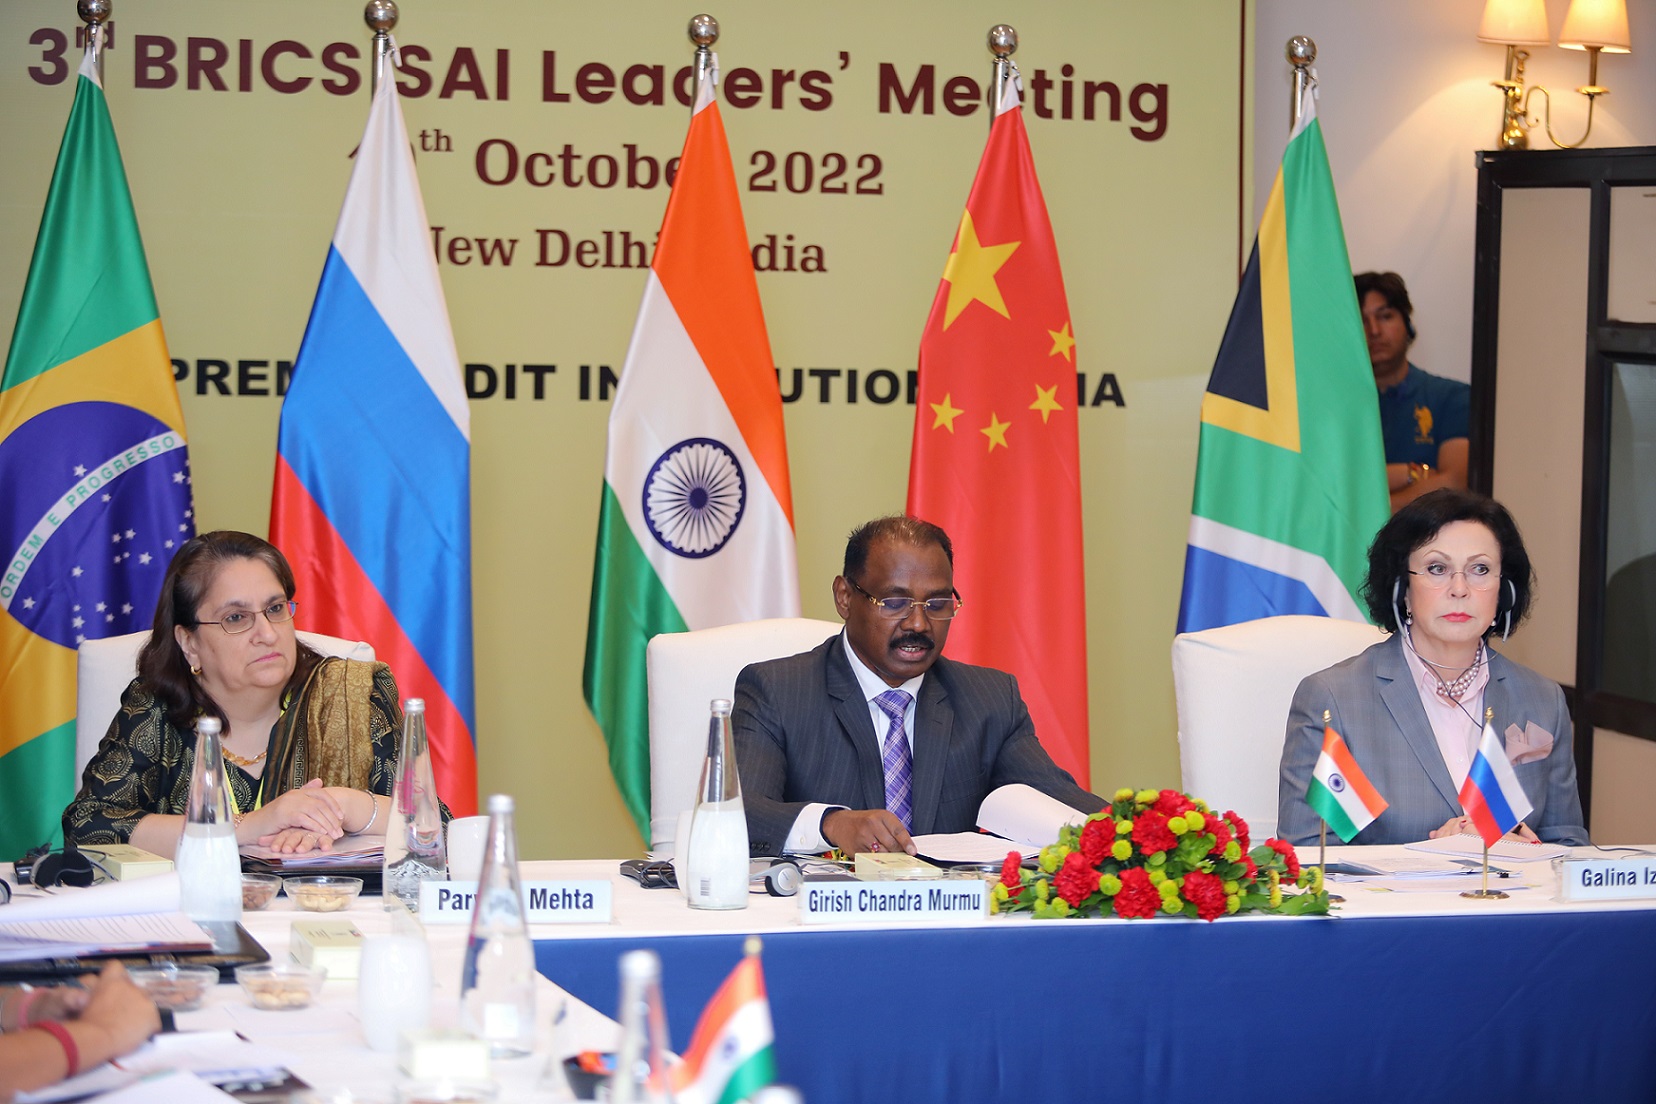 CAG of India, Sh. Girish Chandra Murmu delivering the inaugural address at the 3rd BRICS SAI Leaders meeting hosted by SAI India on 10th October, 2022. To his left is Ms. Galina Izotova, Deputy Chairperson of the Accounts Chamber of the Russian Federation. The Head of the delegations from SAIs of Brazil, China and South Africa joined the meeting virtually